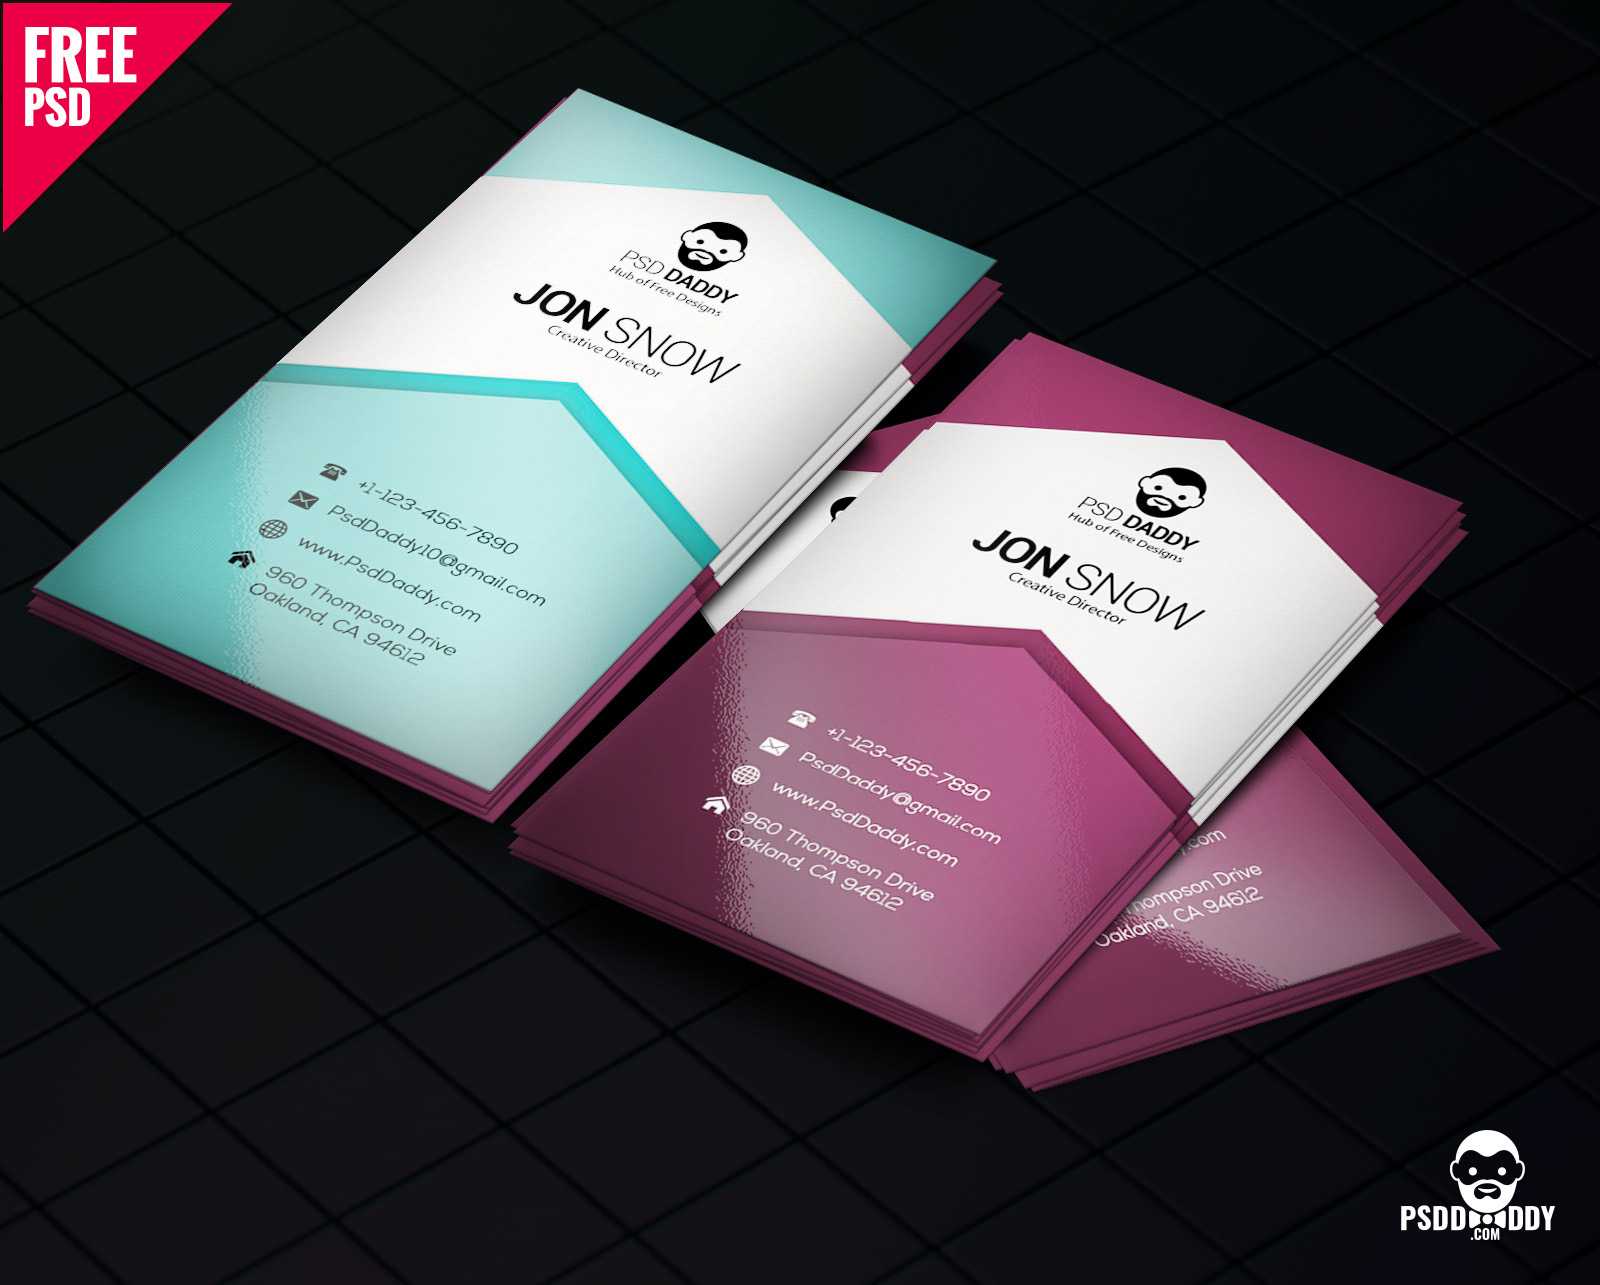 Download]Creative Business Card Psd Free | Psddaddy In Business Card Size Psd Template